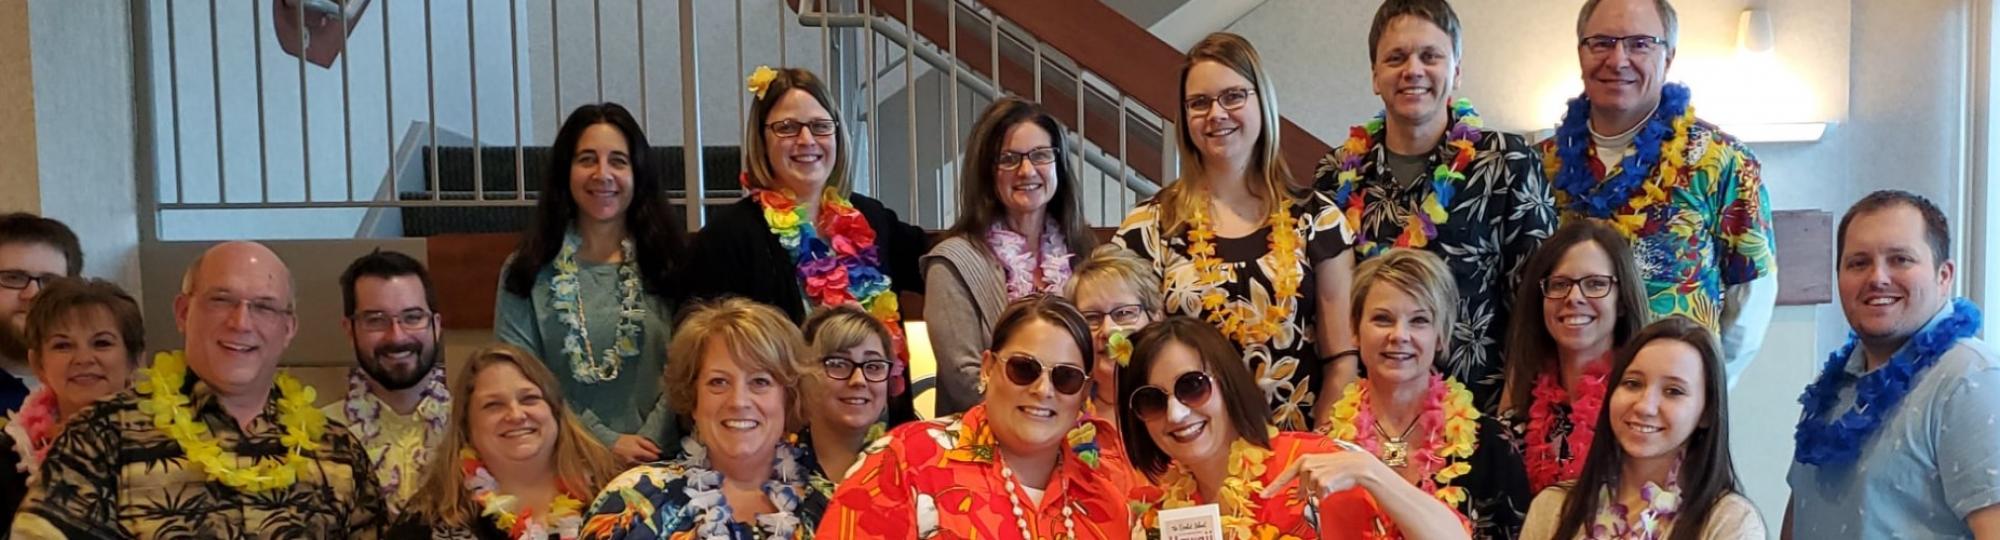 Community Resource Bank staff celebrate Hawaiin day of their United Way campaign - wearing tropical shirts and colorful leis